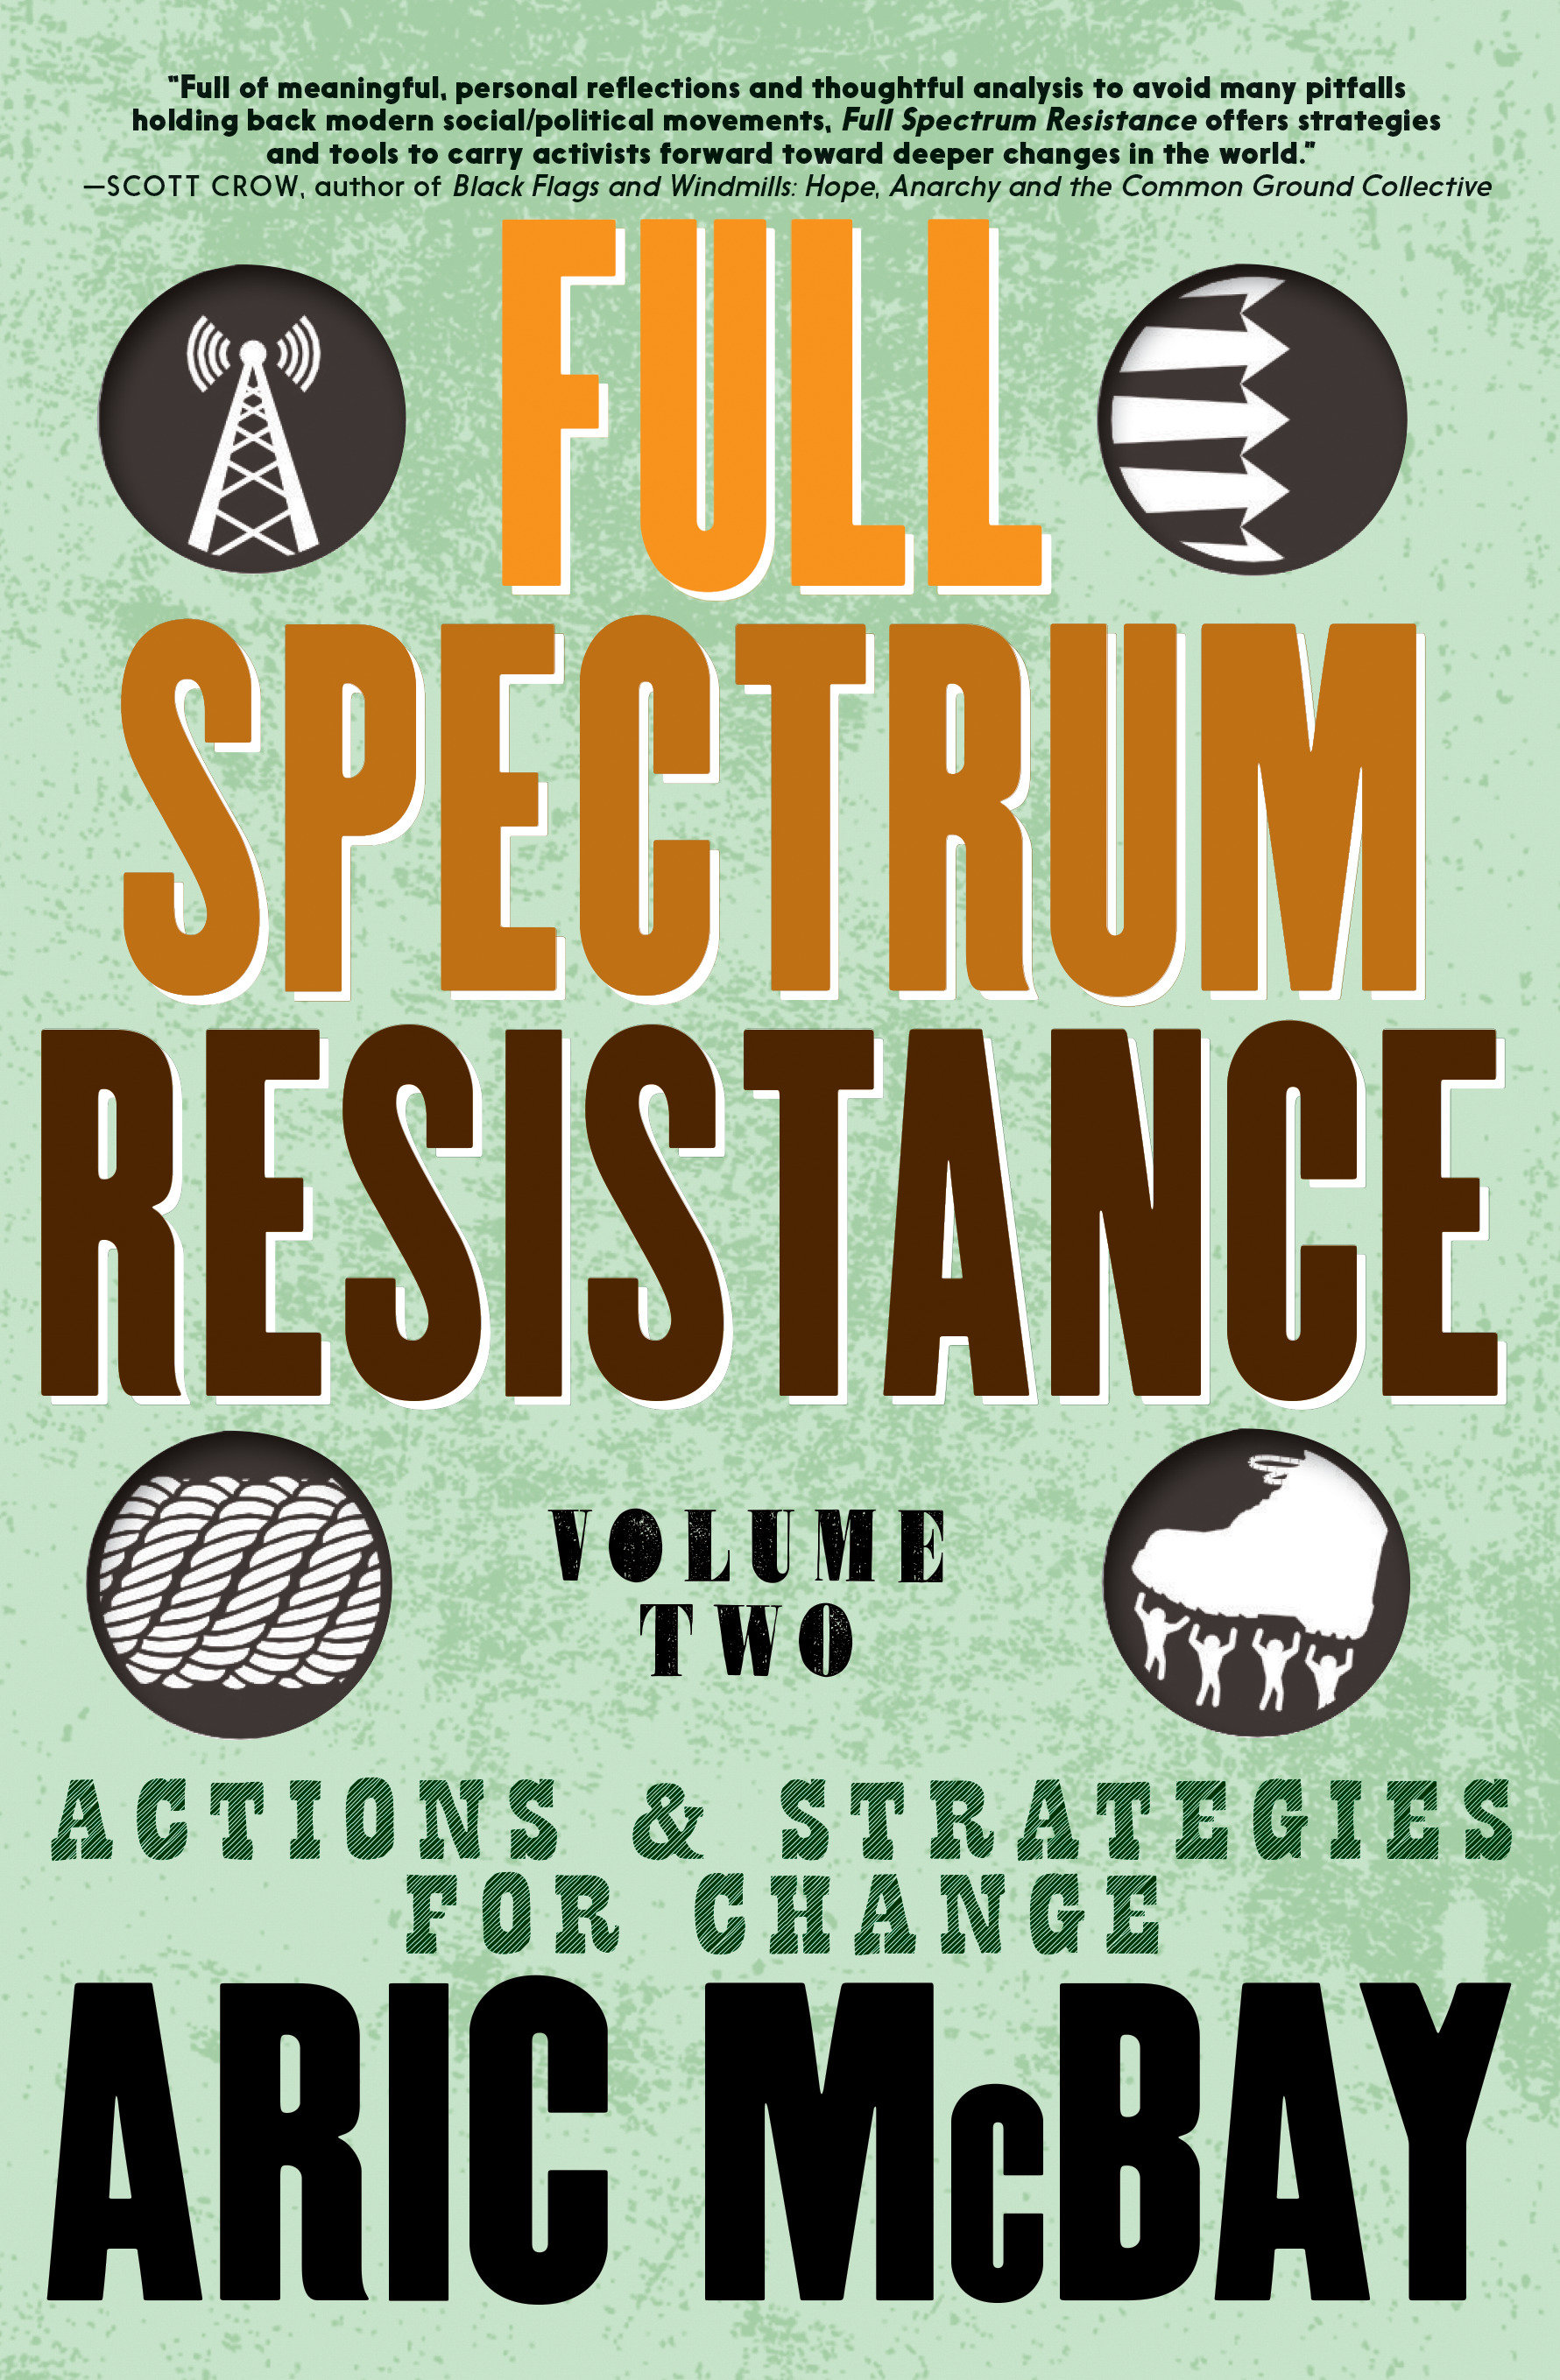 Cover Image of Full Spectrum Resistance, Volume Two